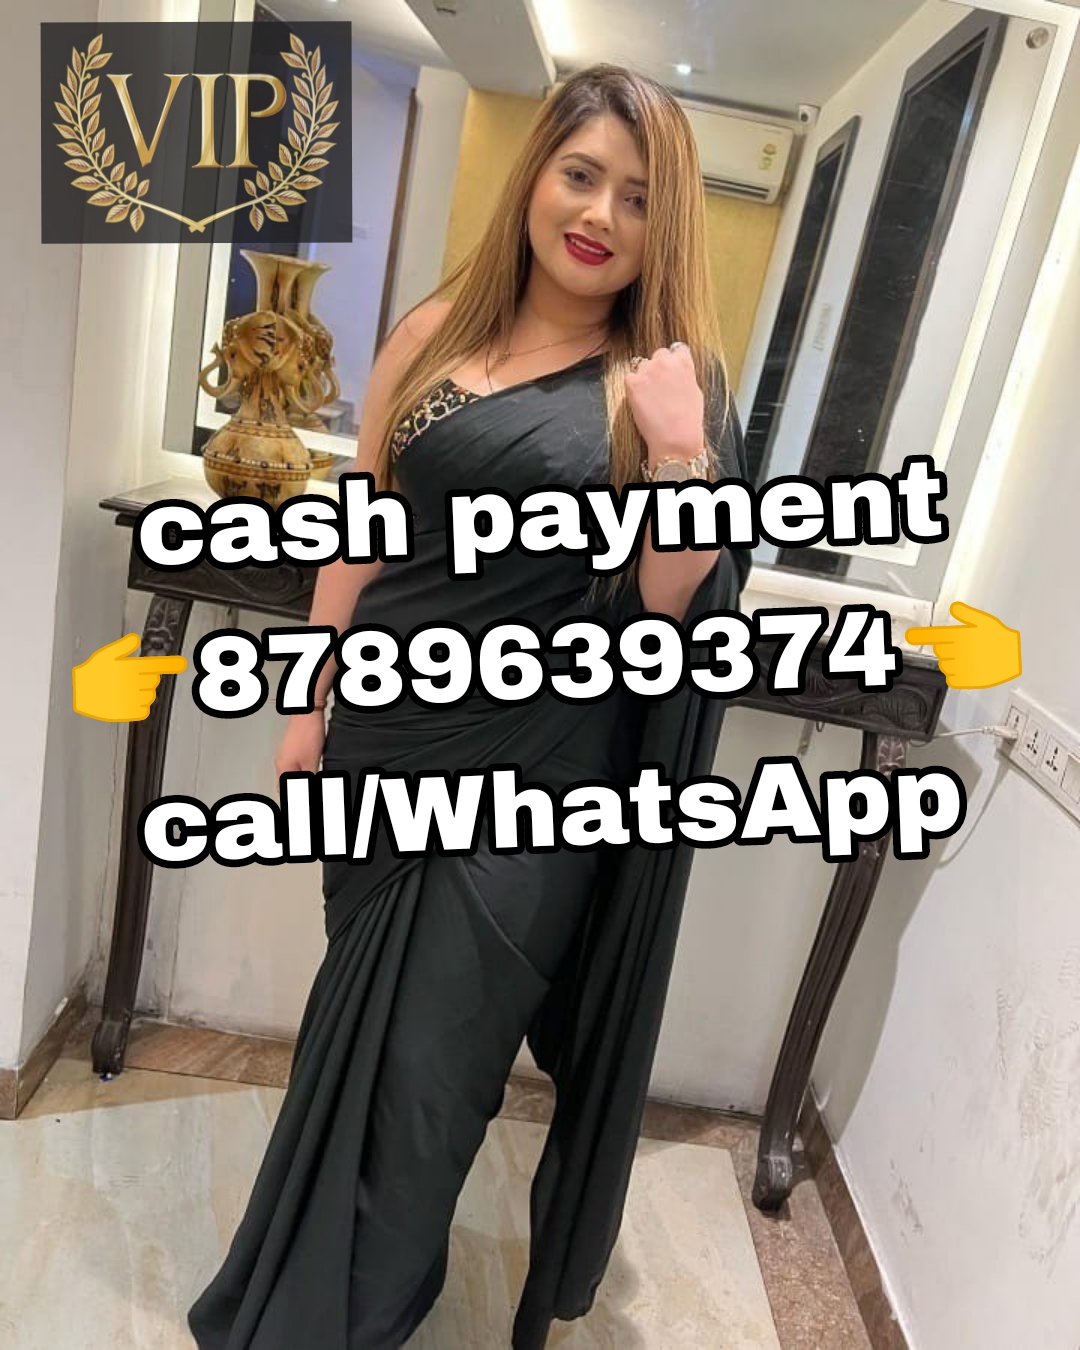 PURI IN VIP MODEL LOW PRICE BEST SERVICE AVAILABLE ANYTIME GENUINE 